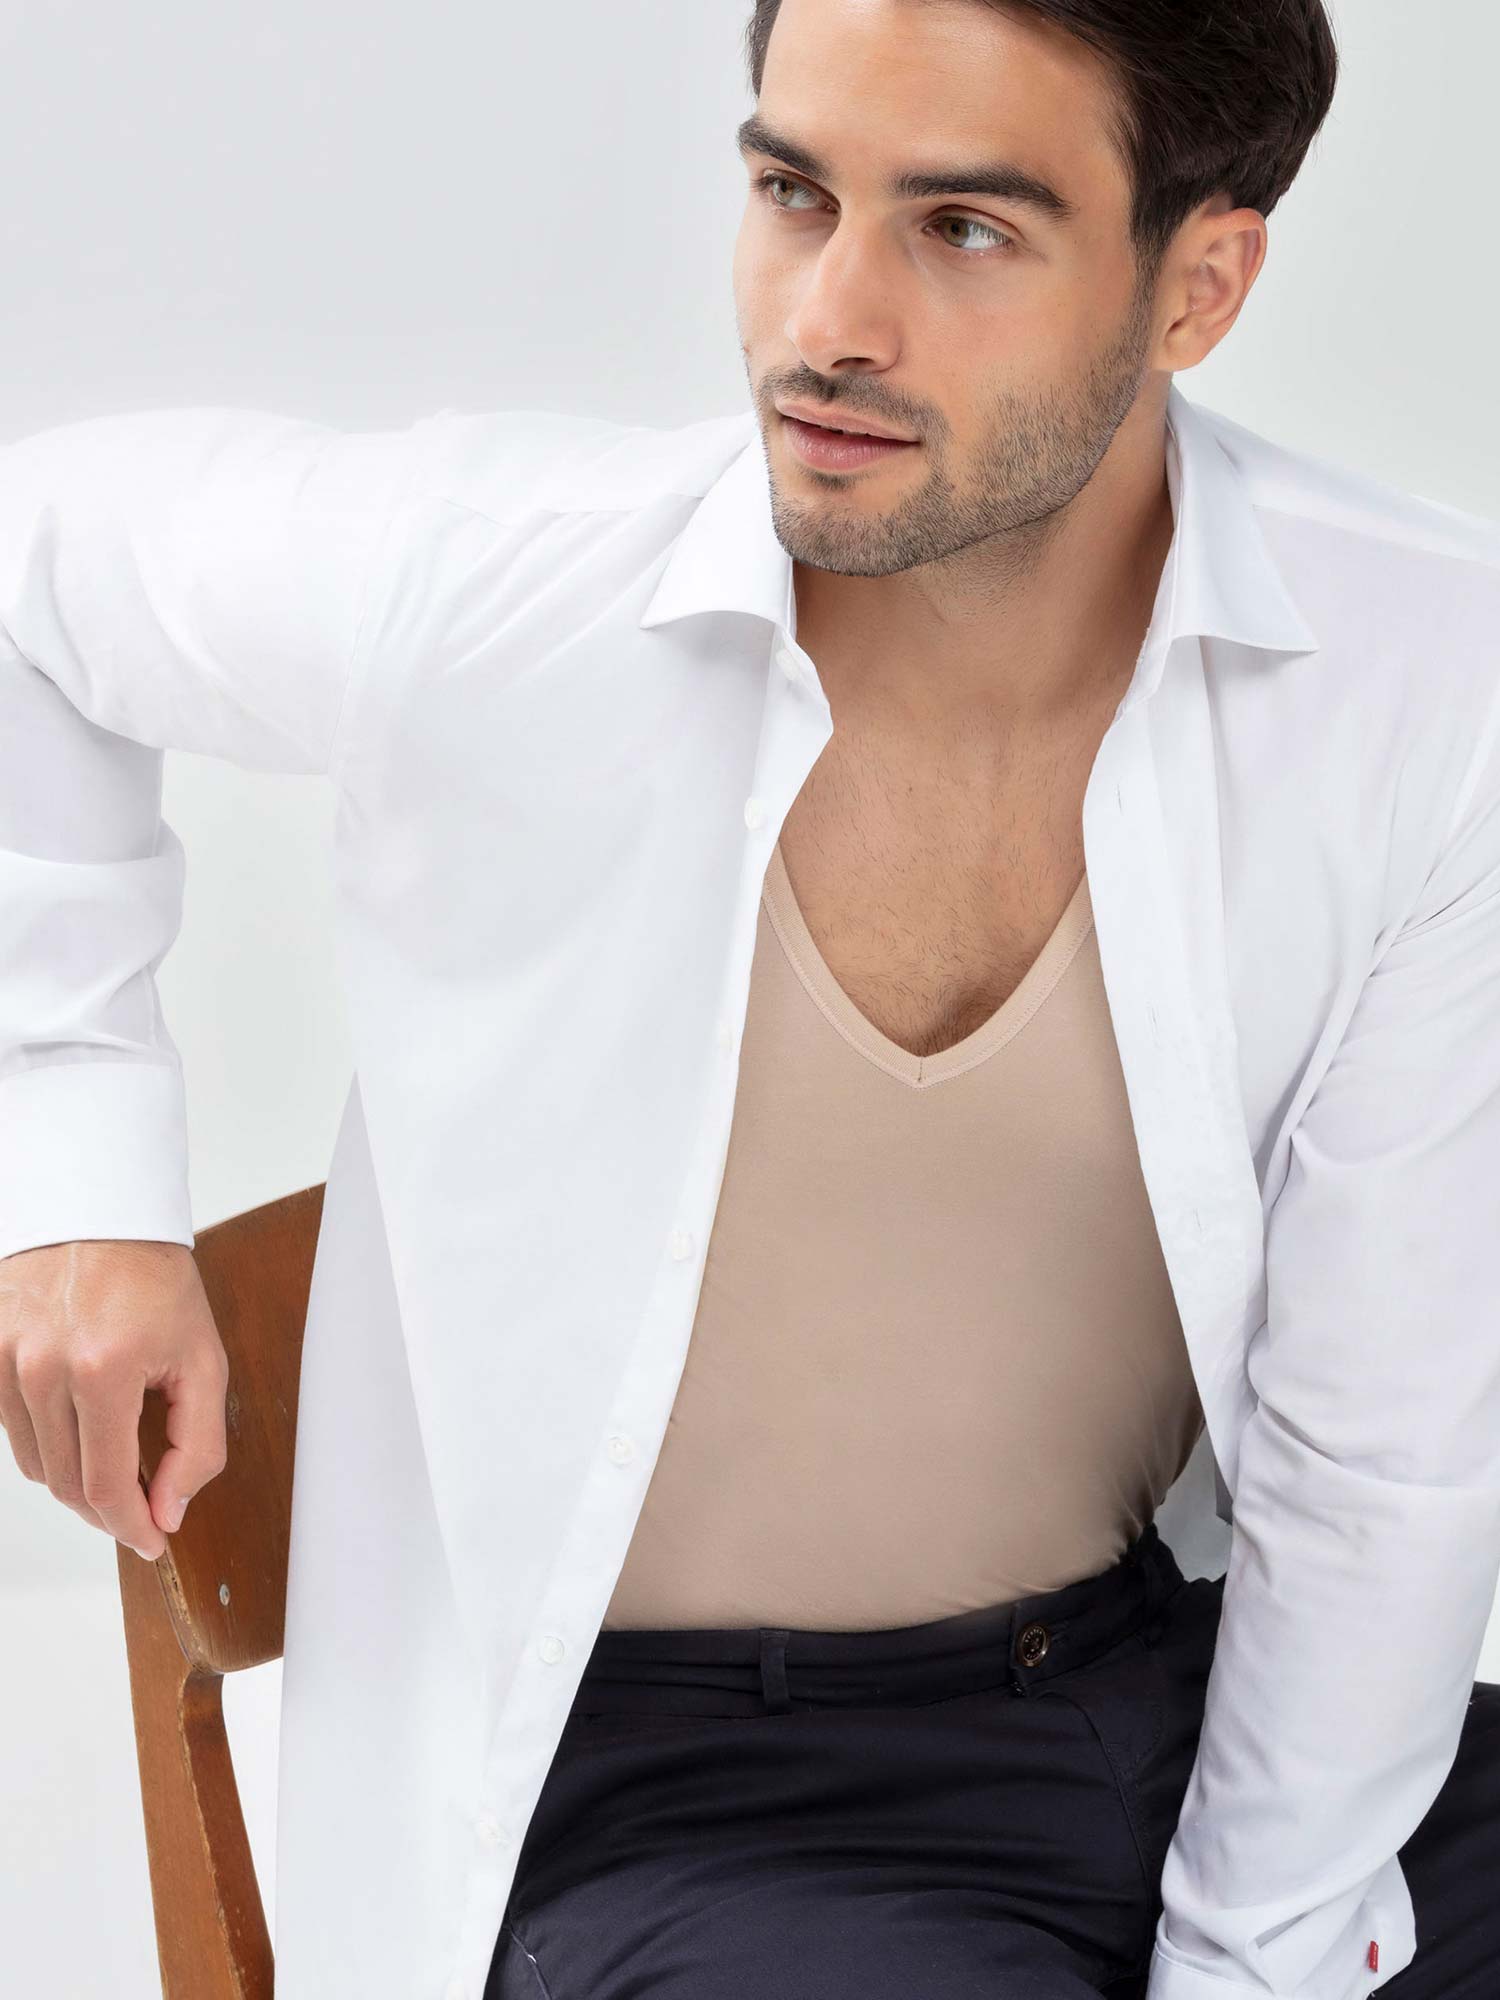 The perfect undershirt for grooms | mey®